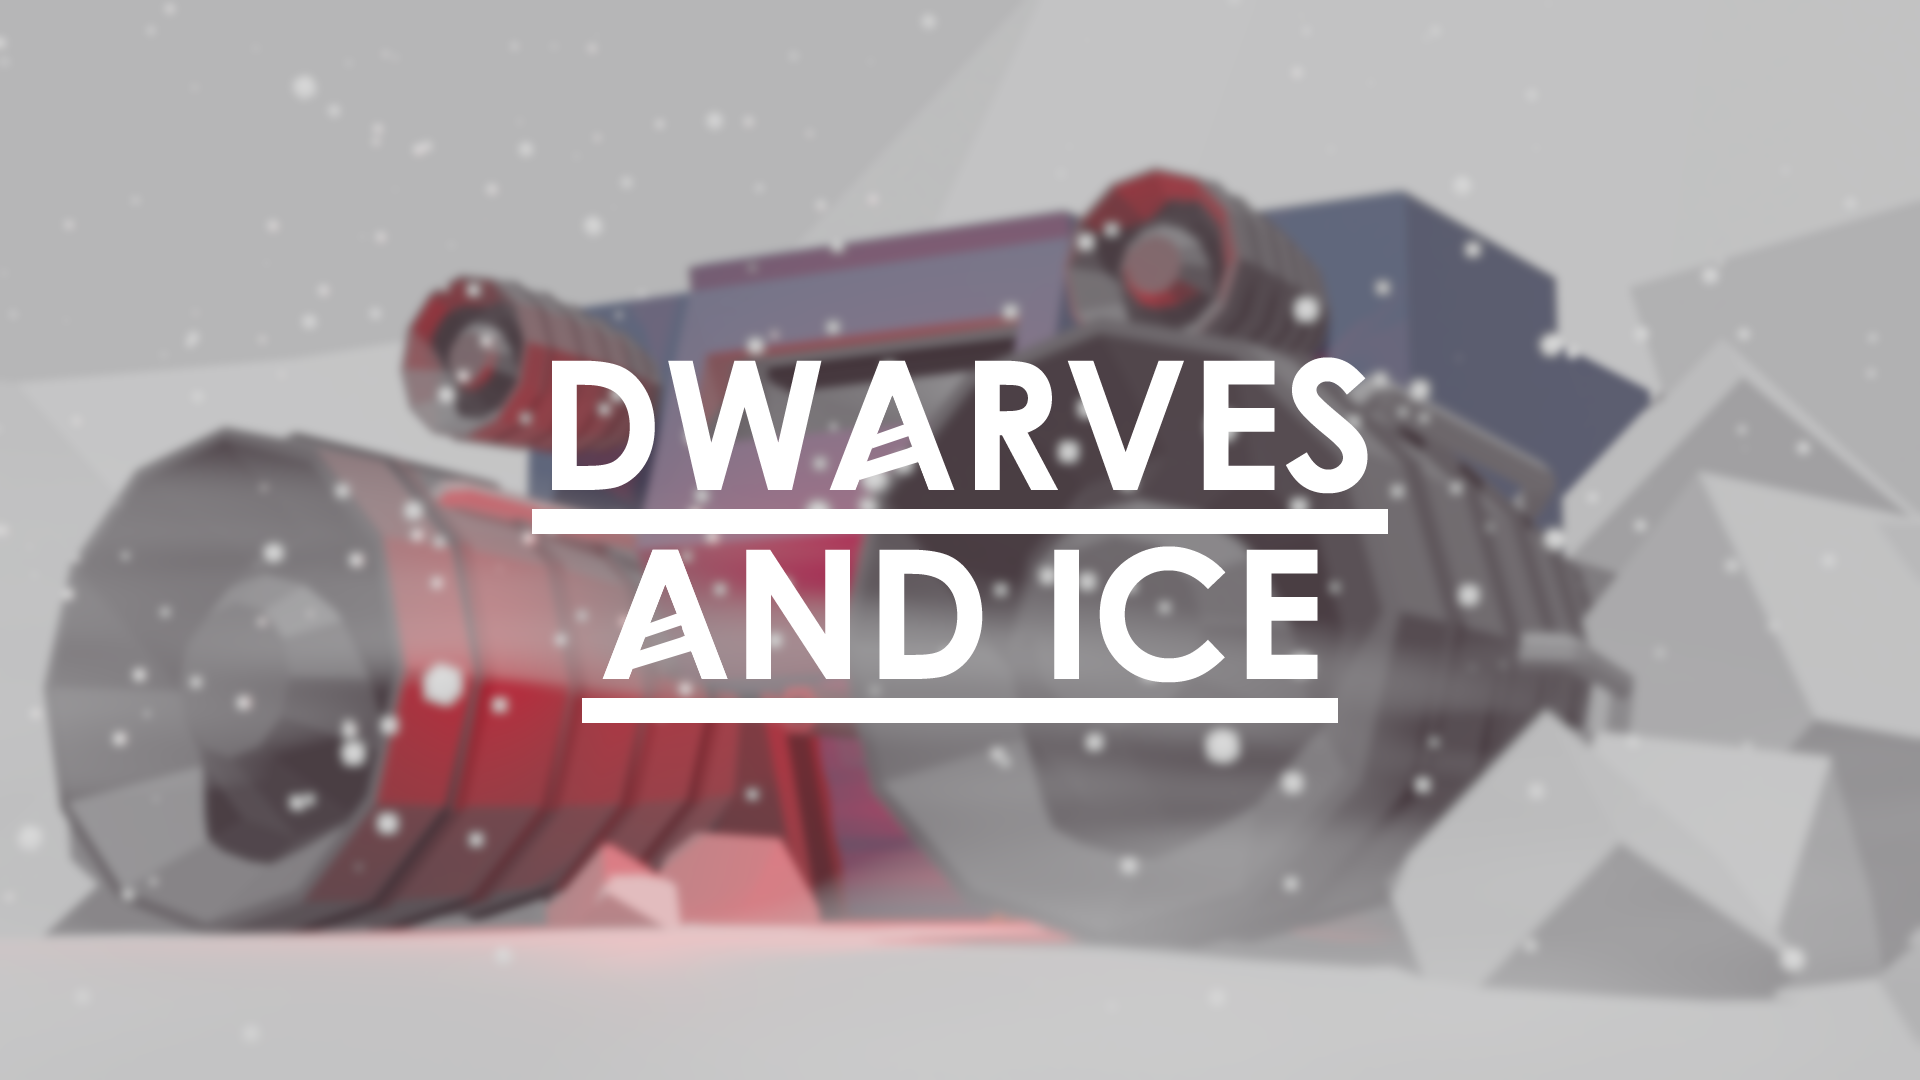 Dwarves and ICE